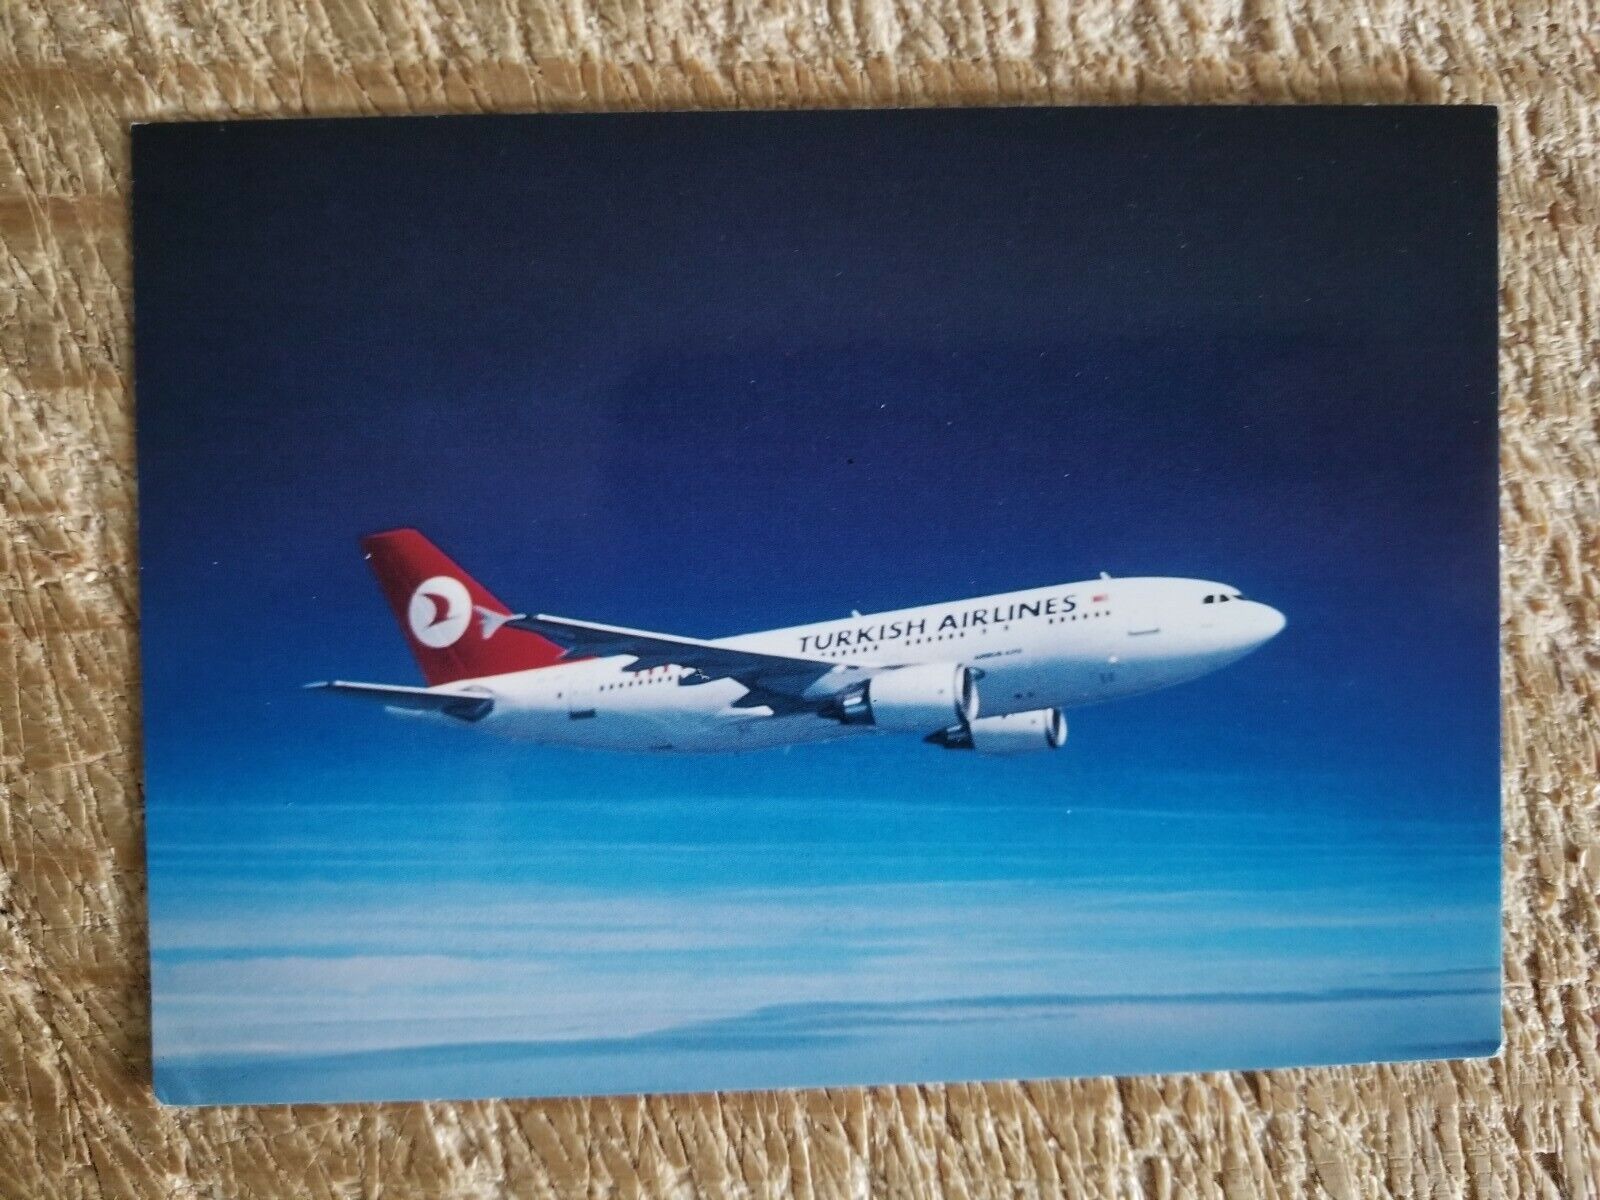 TURKISH AIRLINES THY AIRBUS A310-300.VTG AIRCRAFT POSTCARD*P44